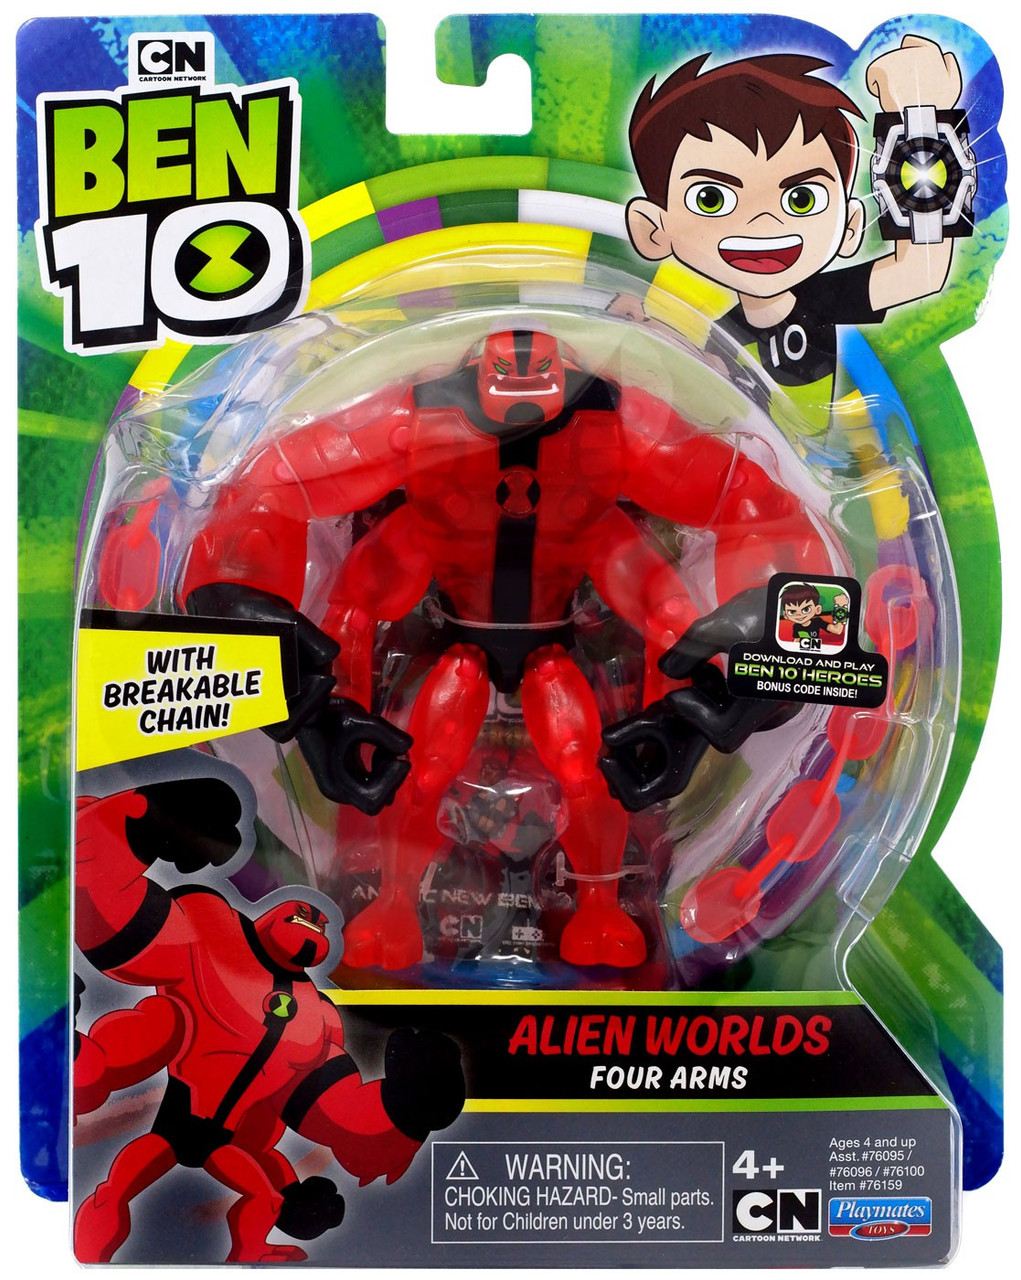 Ben 10 Alien Worlds Four Arms 5 Action Figure Breakable Chain Playmates Toywiz - roblox homeworld rp codes